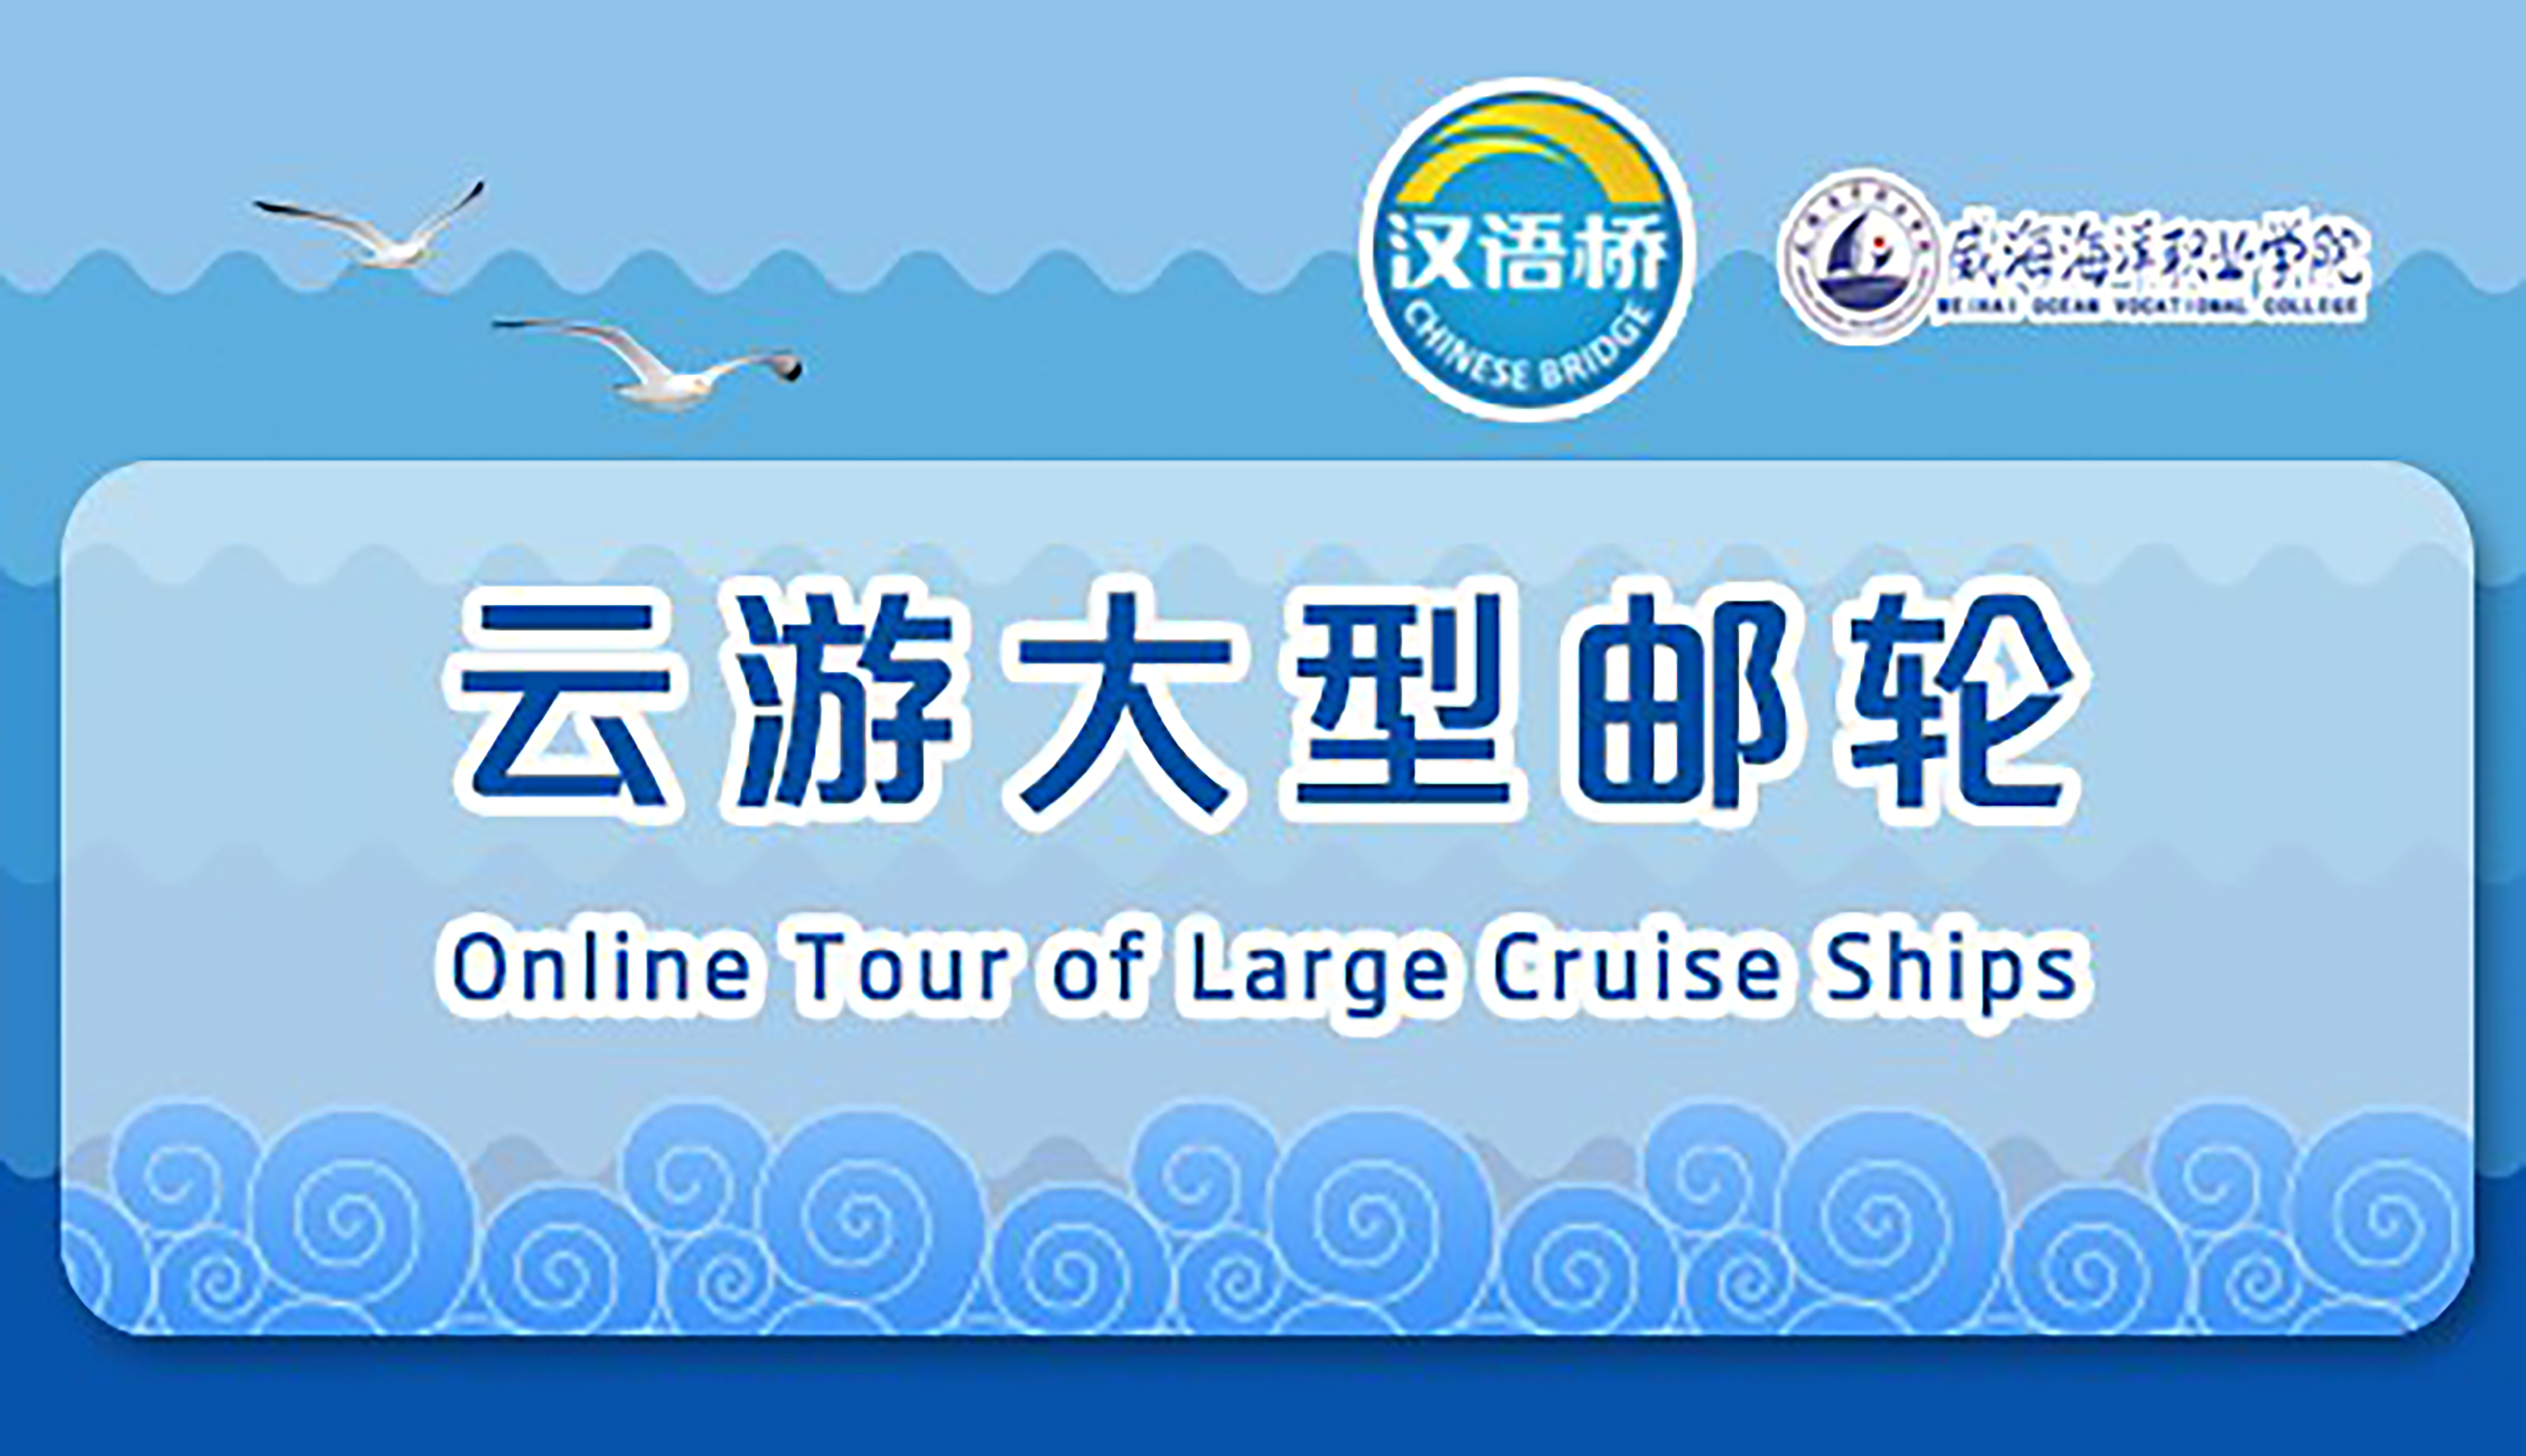 Online Tour of Large Cruise Ships